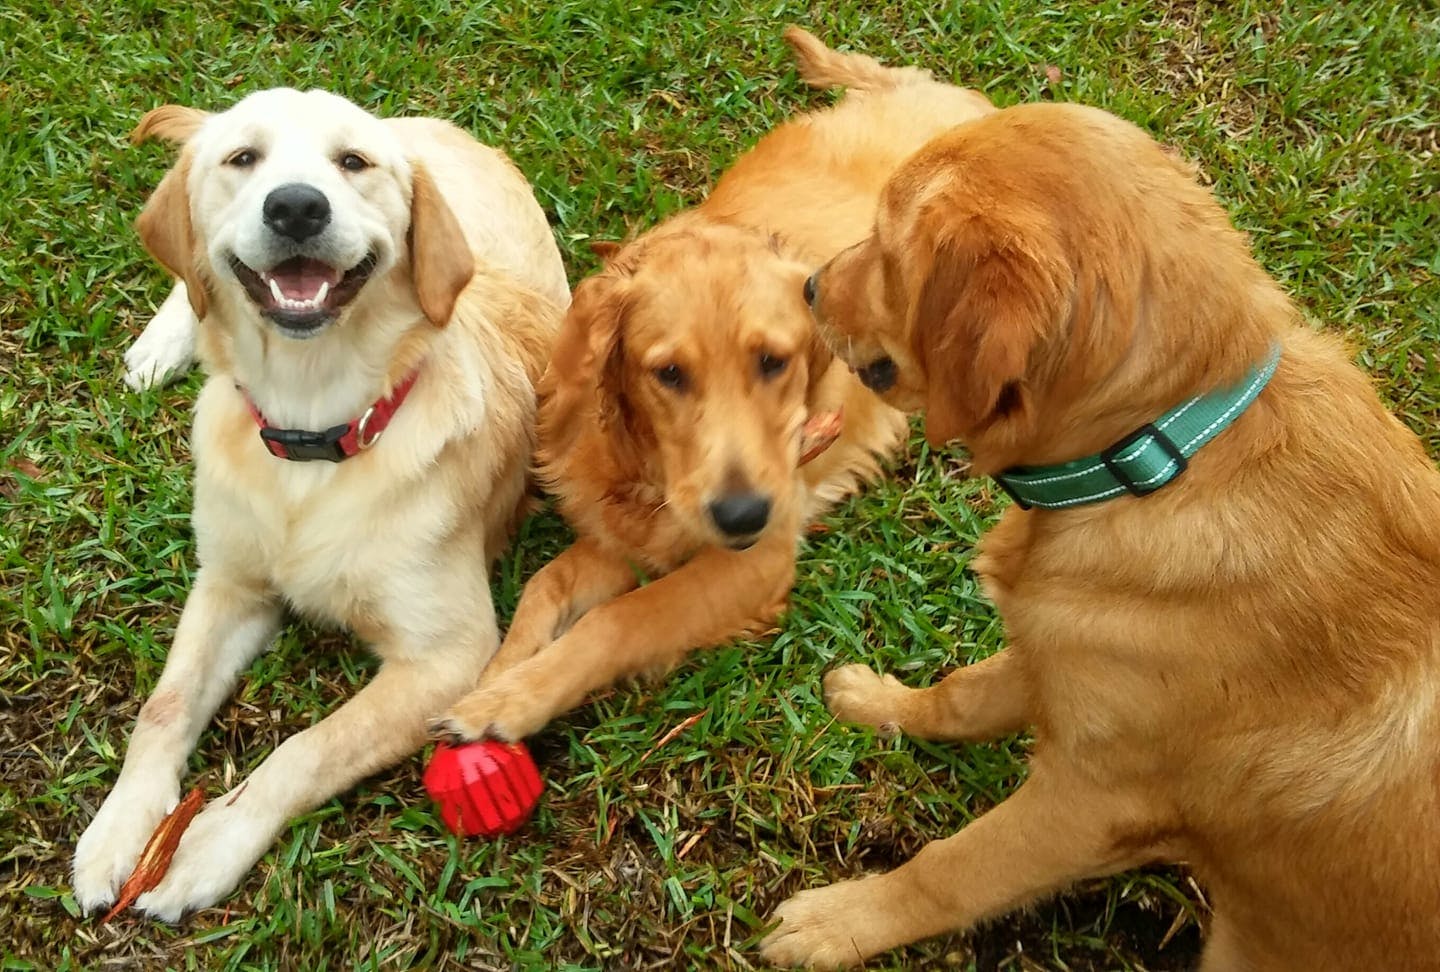  We breed awesome AKC Golden Retrievers!